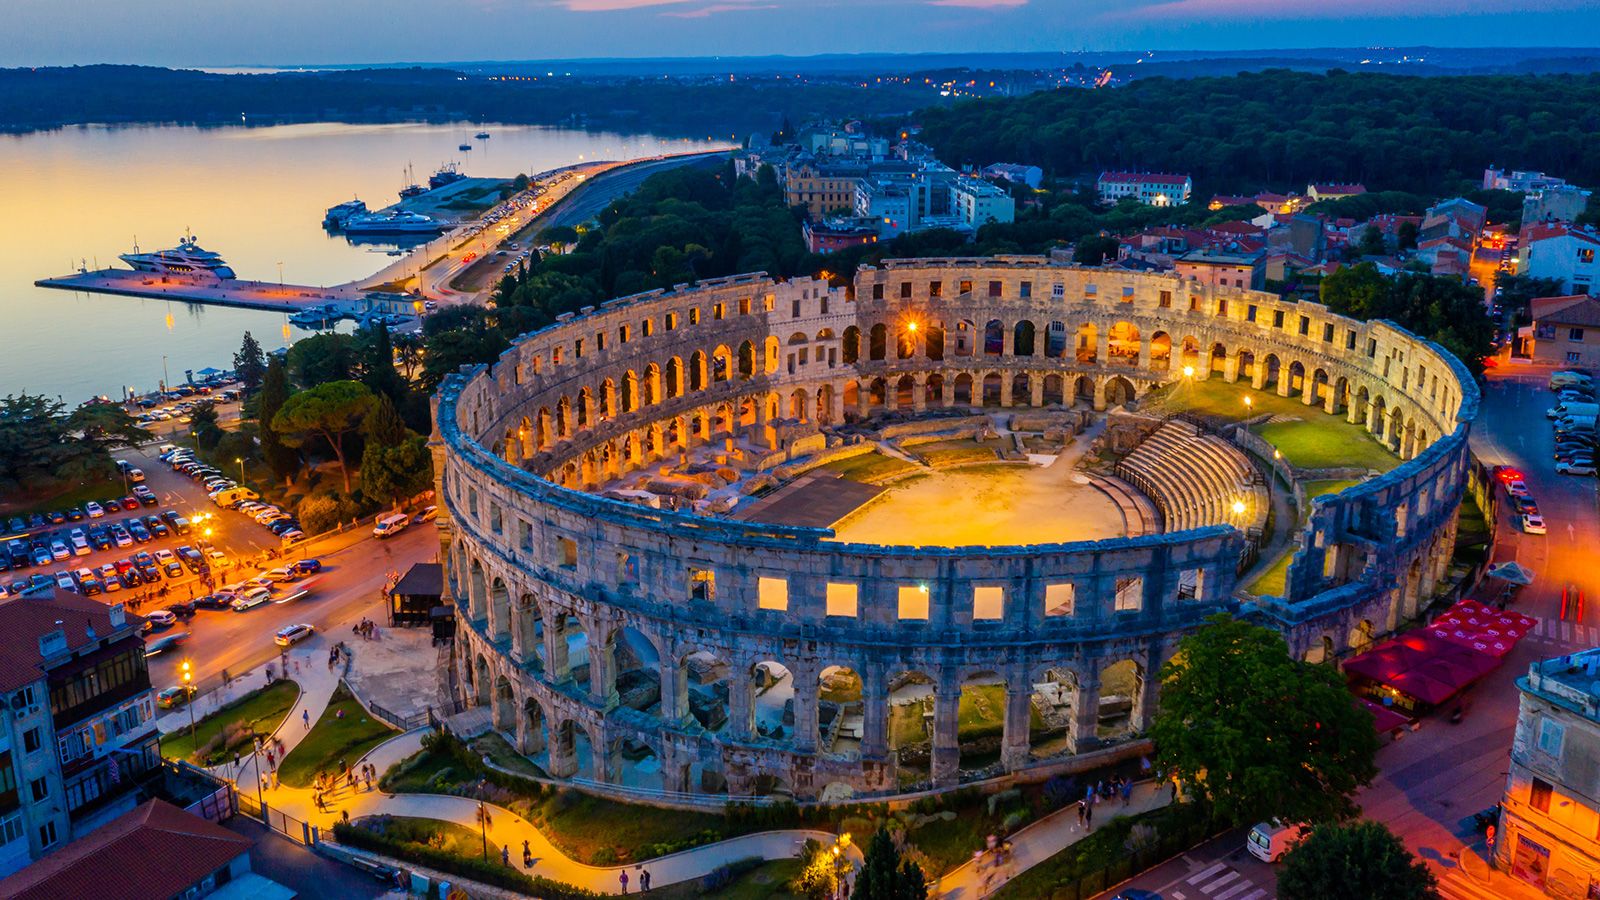 <strong>Pula: </strong>Nearly 2,000 years after it was built, Pula Arena remains one of the world's best-preserved Roman structures, providing a venue for plays, concerts and the annual outdoor Pula Film Festival.